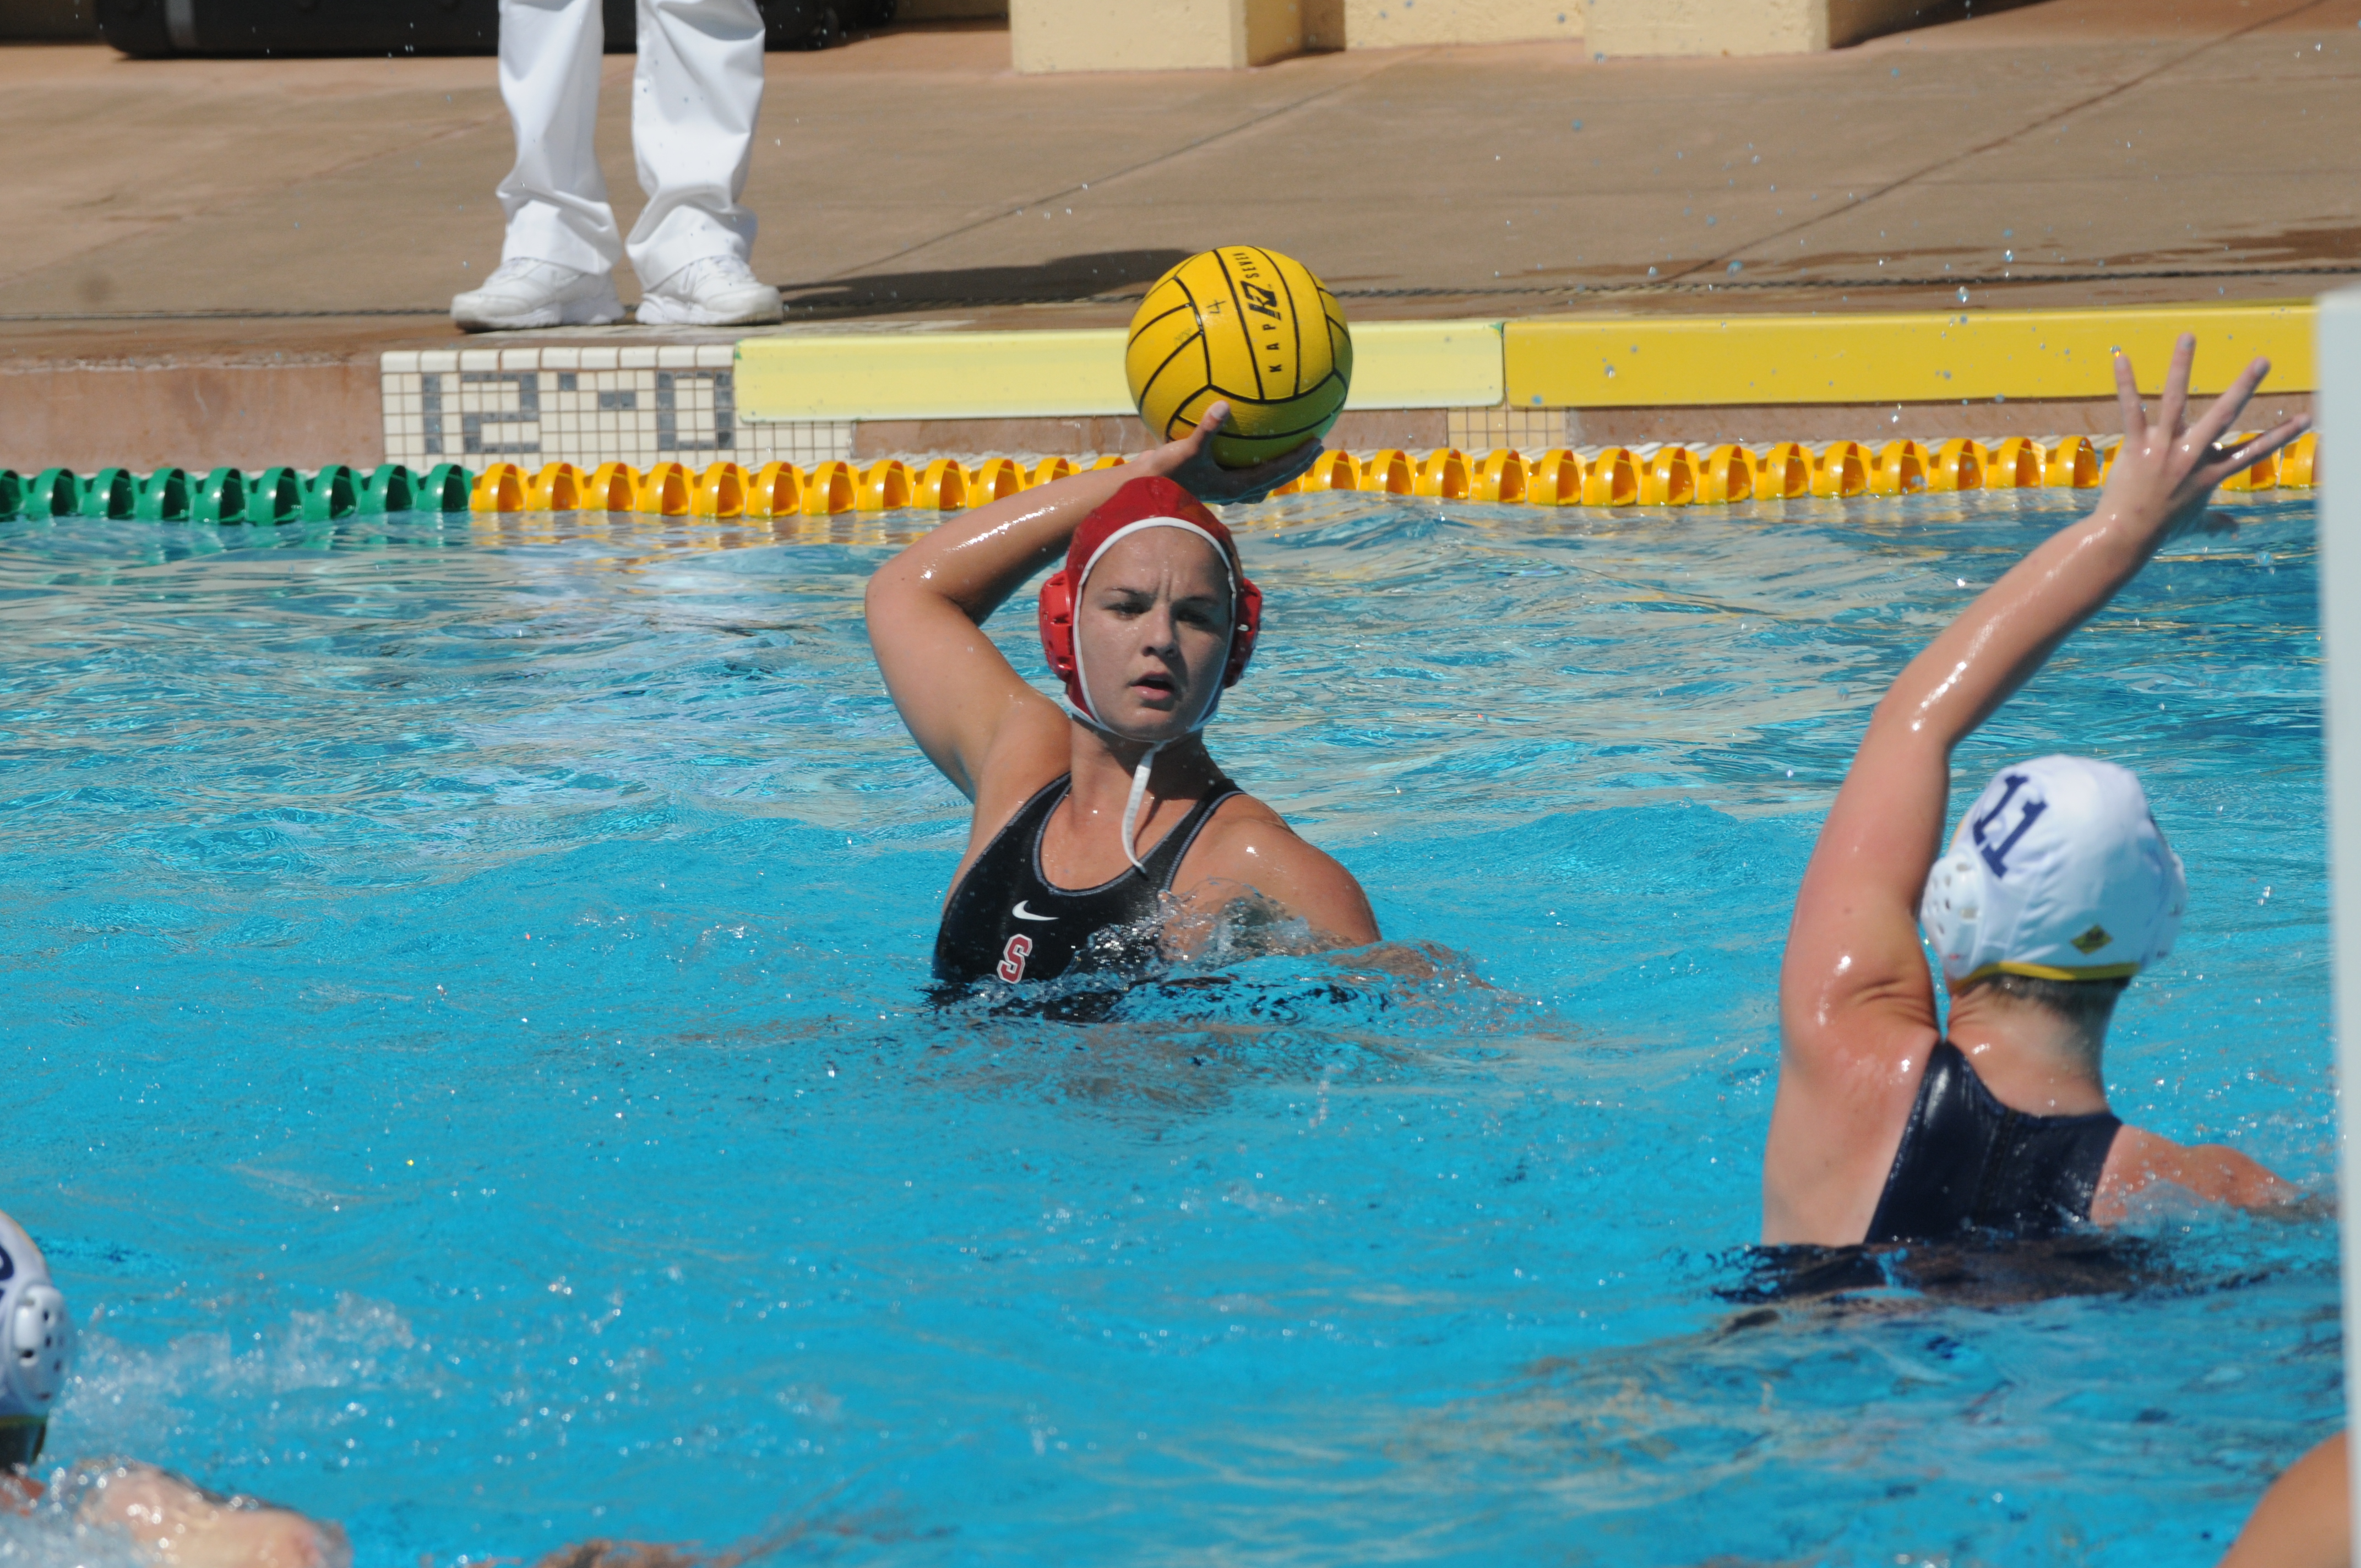 Already off to a perfect 5-0 start, the women's water polo team and sophomore star Kiley Neushal (above with ball) are aiming higher in hopes of a third consecutive national championship this year (Stanford Daily File Photo)